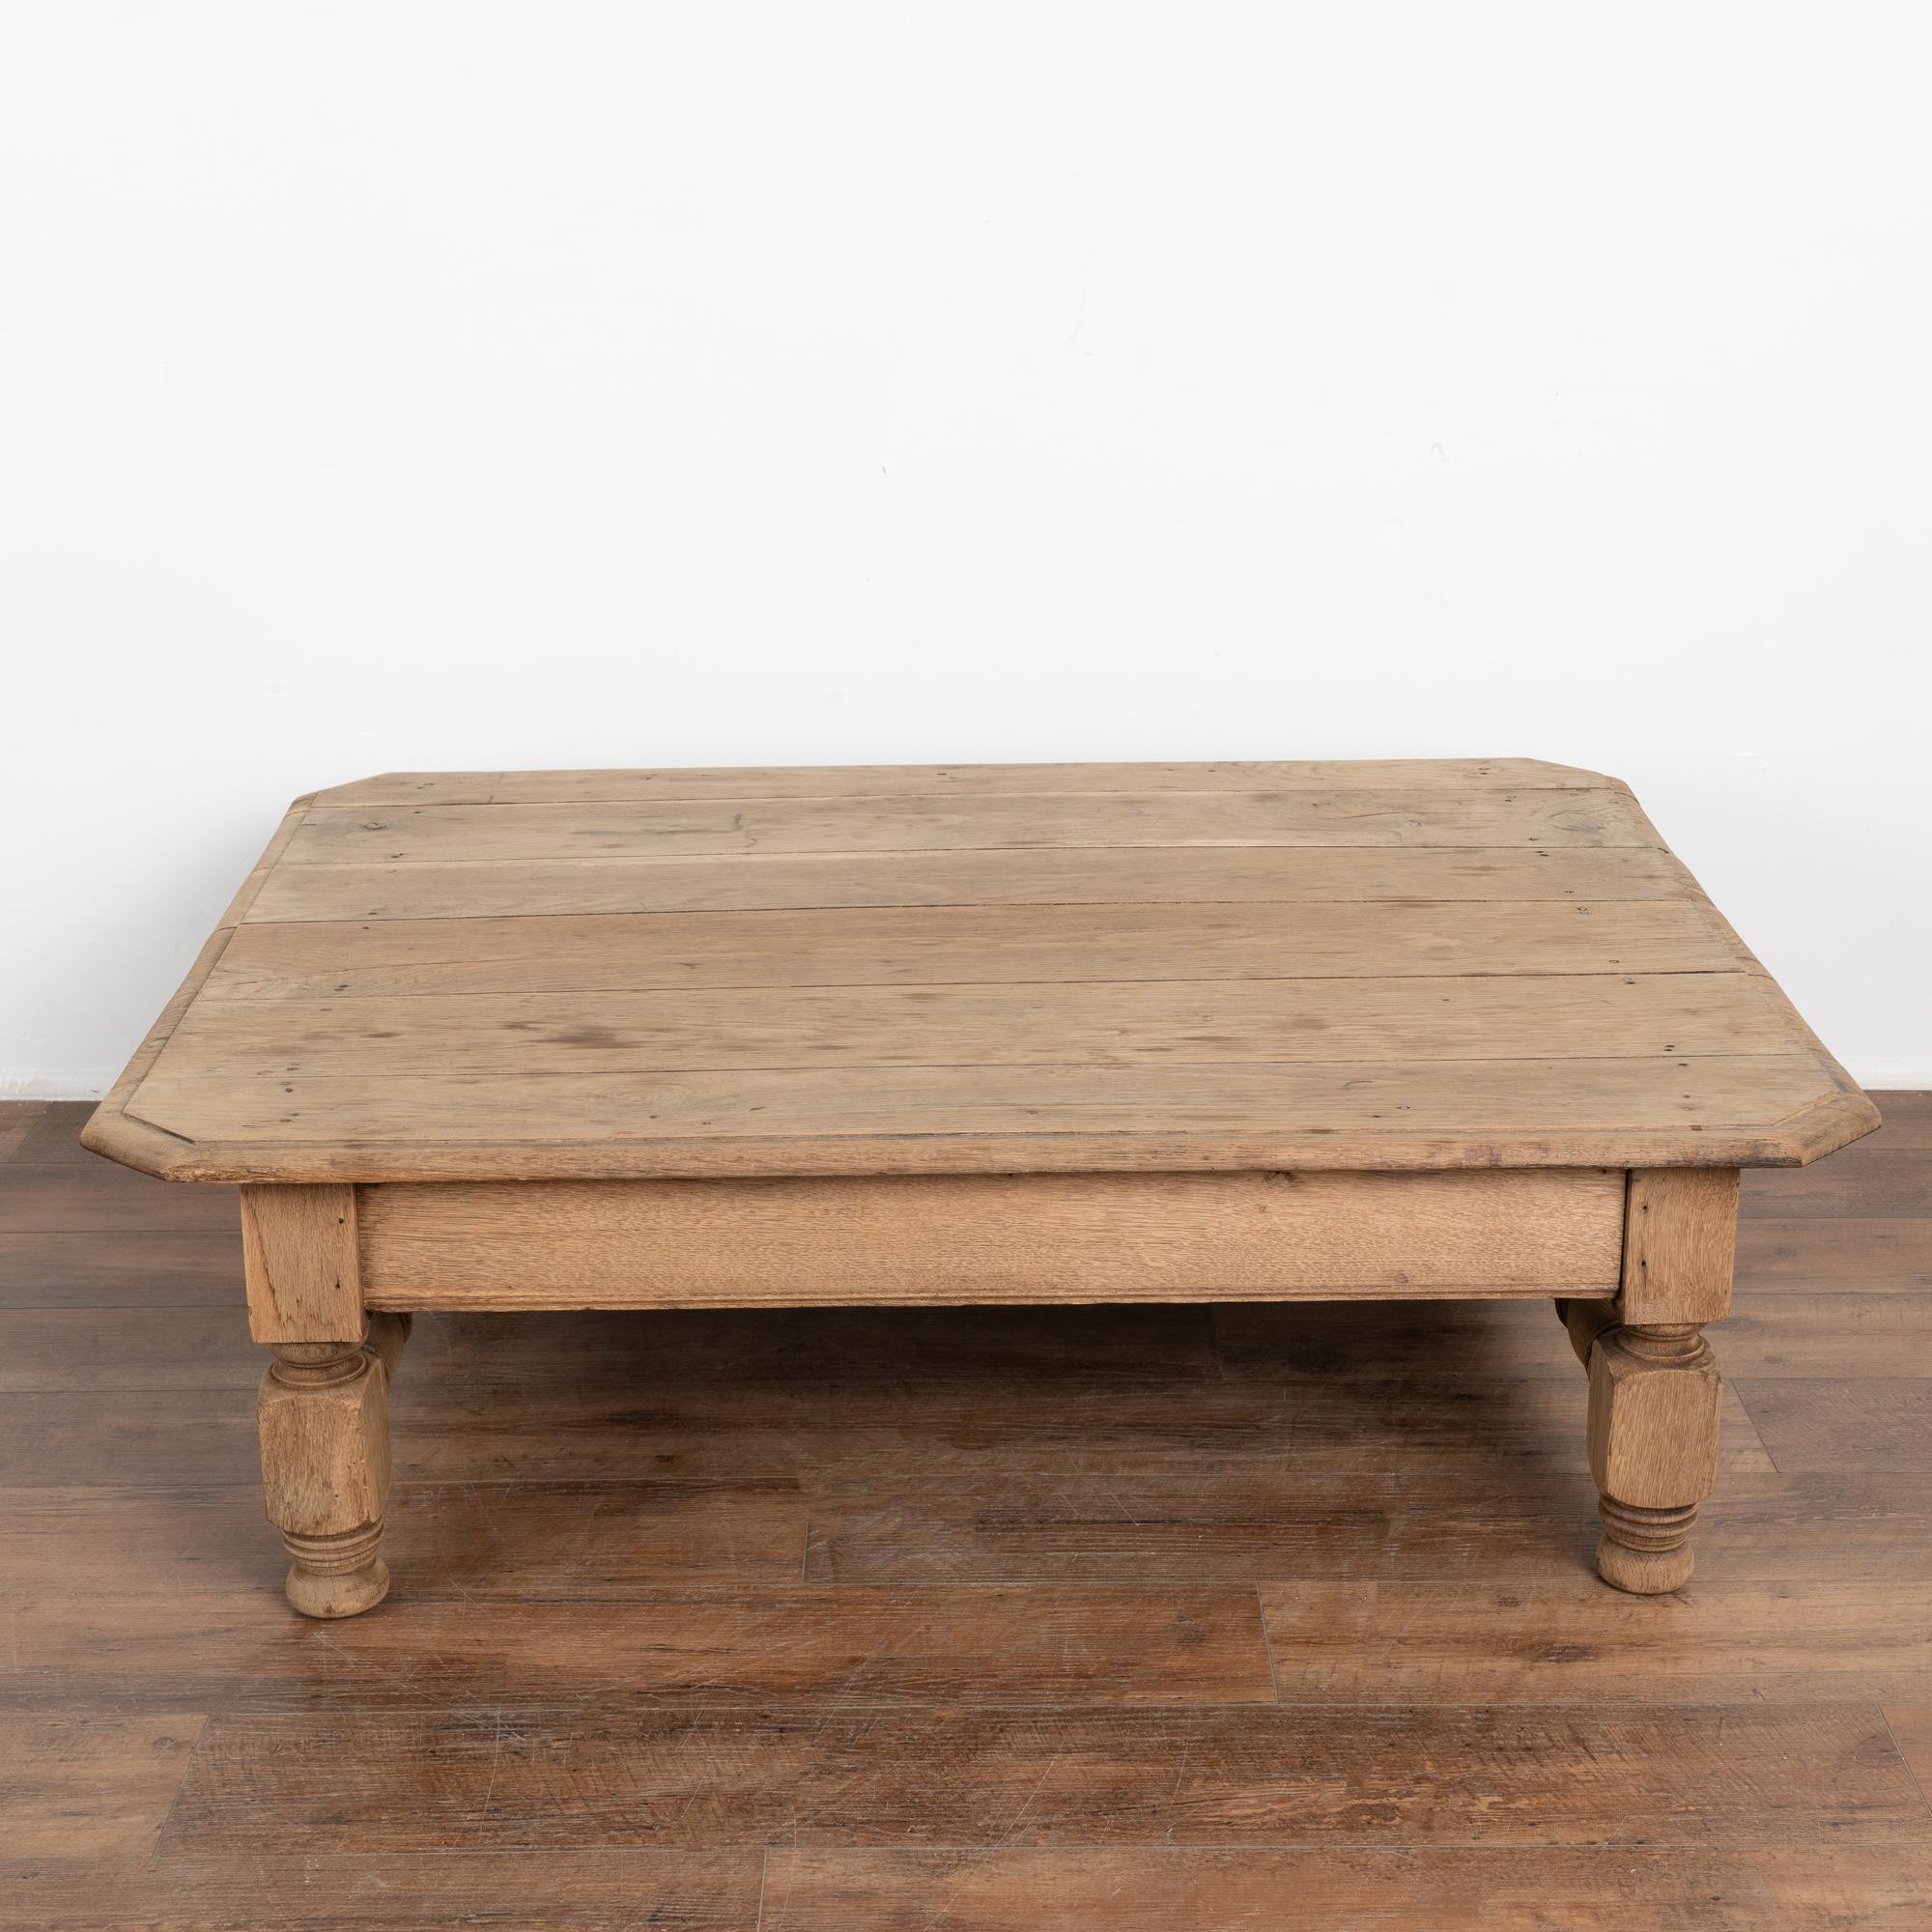 Country Bleached Oak Coffee Table, France circa 1920-40